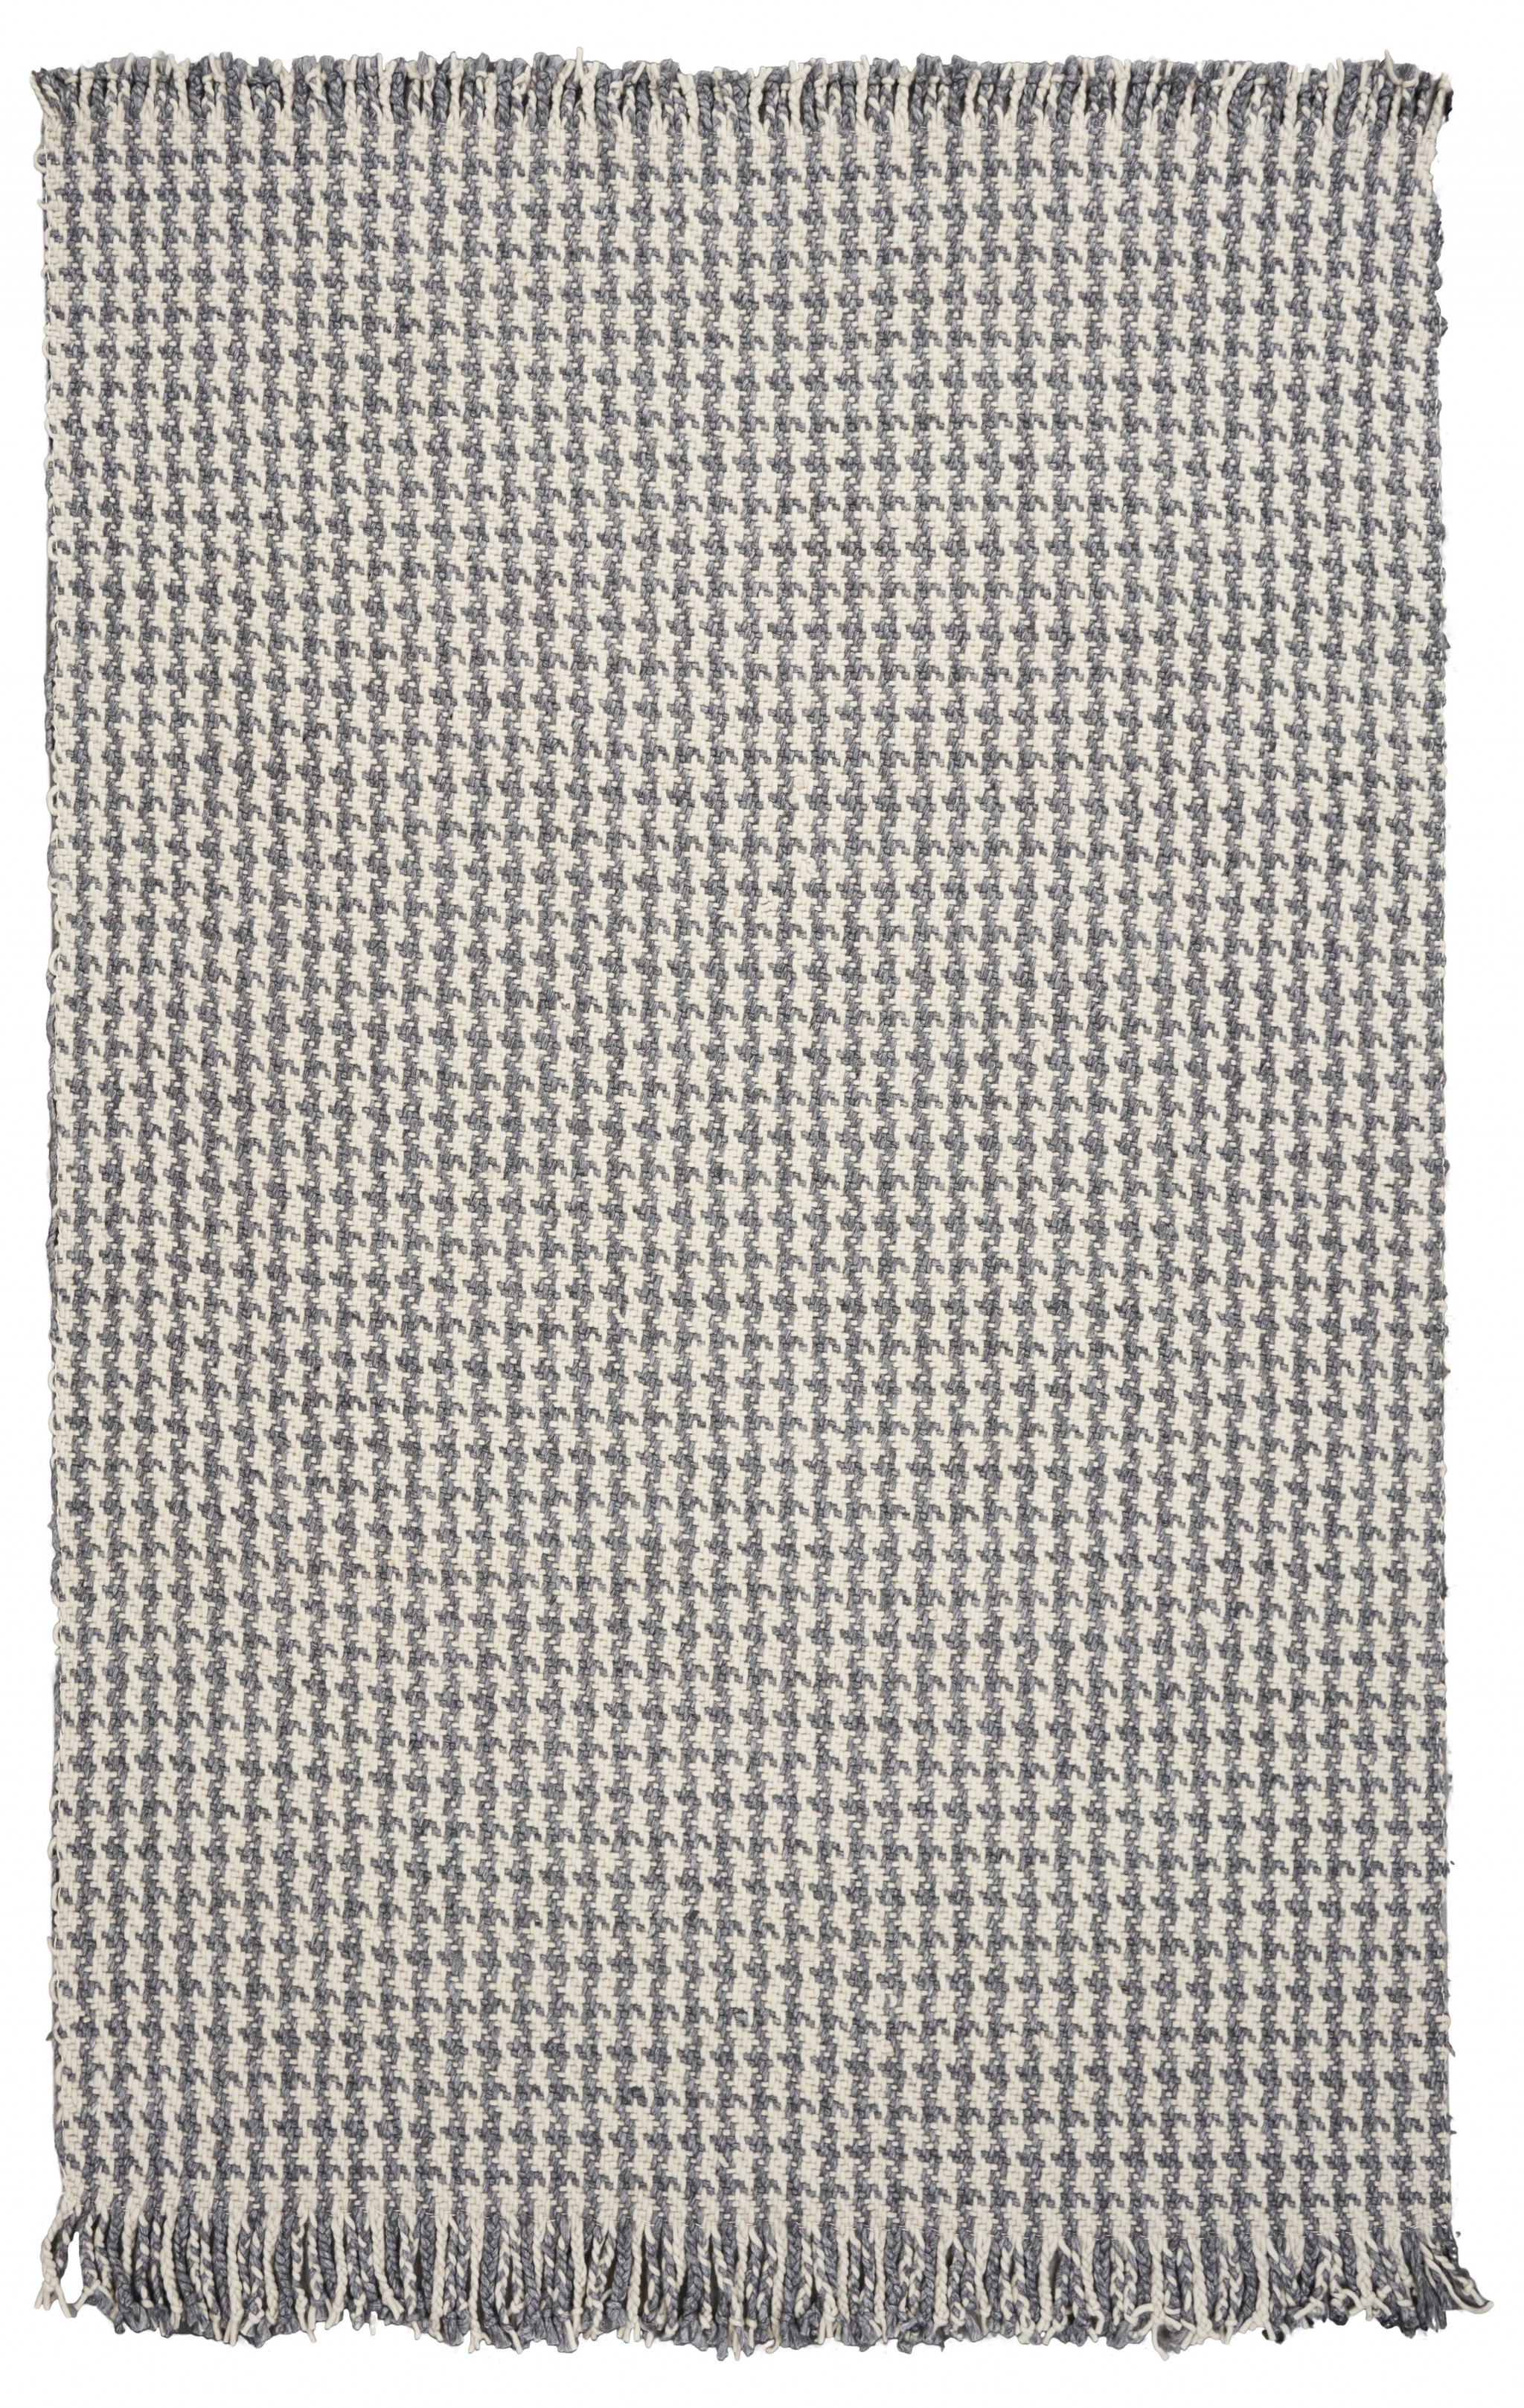 3'X5'  Ivory Grey Hand Woven Houndstooth With Braided Fringe Indoor Area Rug-354079-1